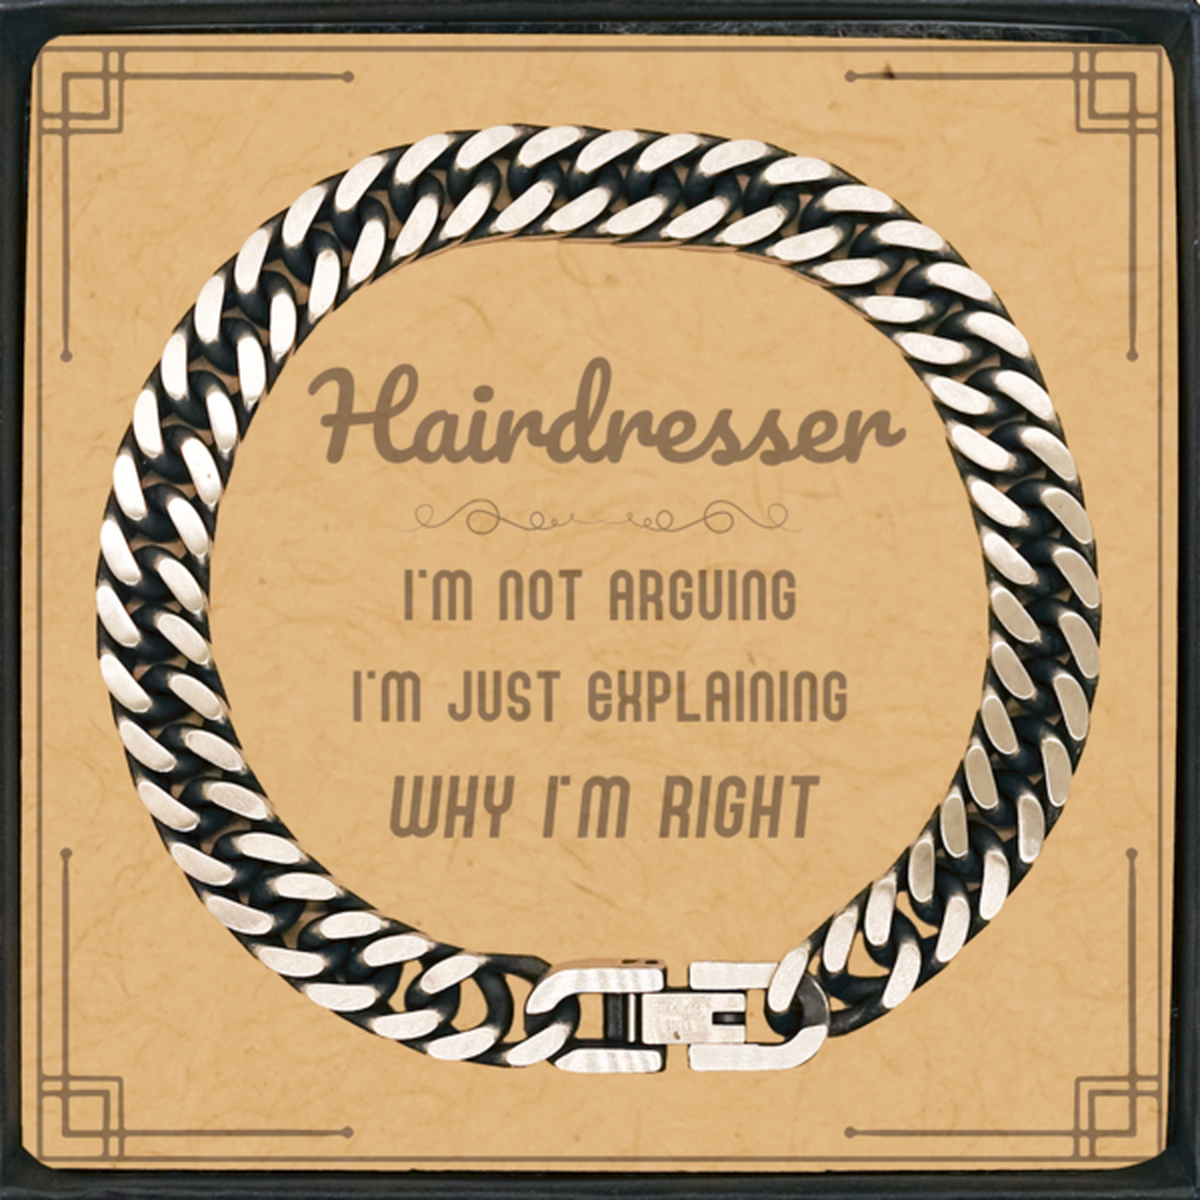 Hairdresser I'm not Arguing. I'm Just Explaining Why I'm RIGHT Cuban Link Chain Bracelet, Funny Saying Quote Hairdresser Gifts For Hairdresser Message Card Graduation Birthday Christmas Gifts for Men Women Coworker